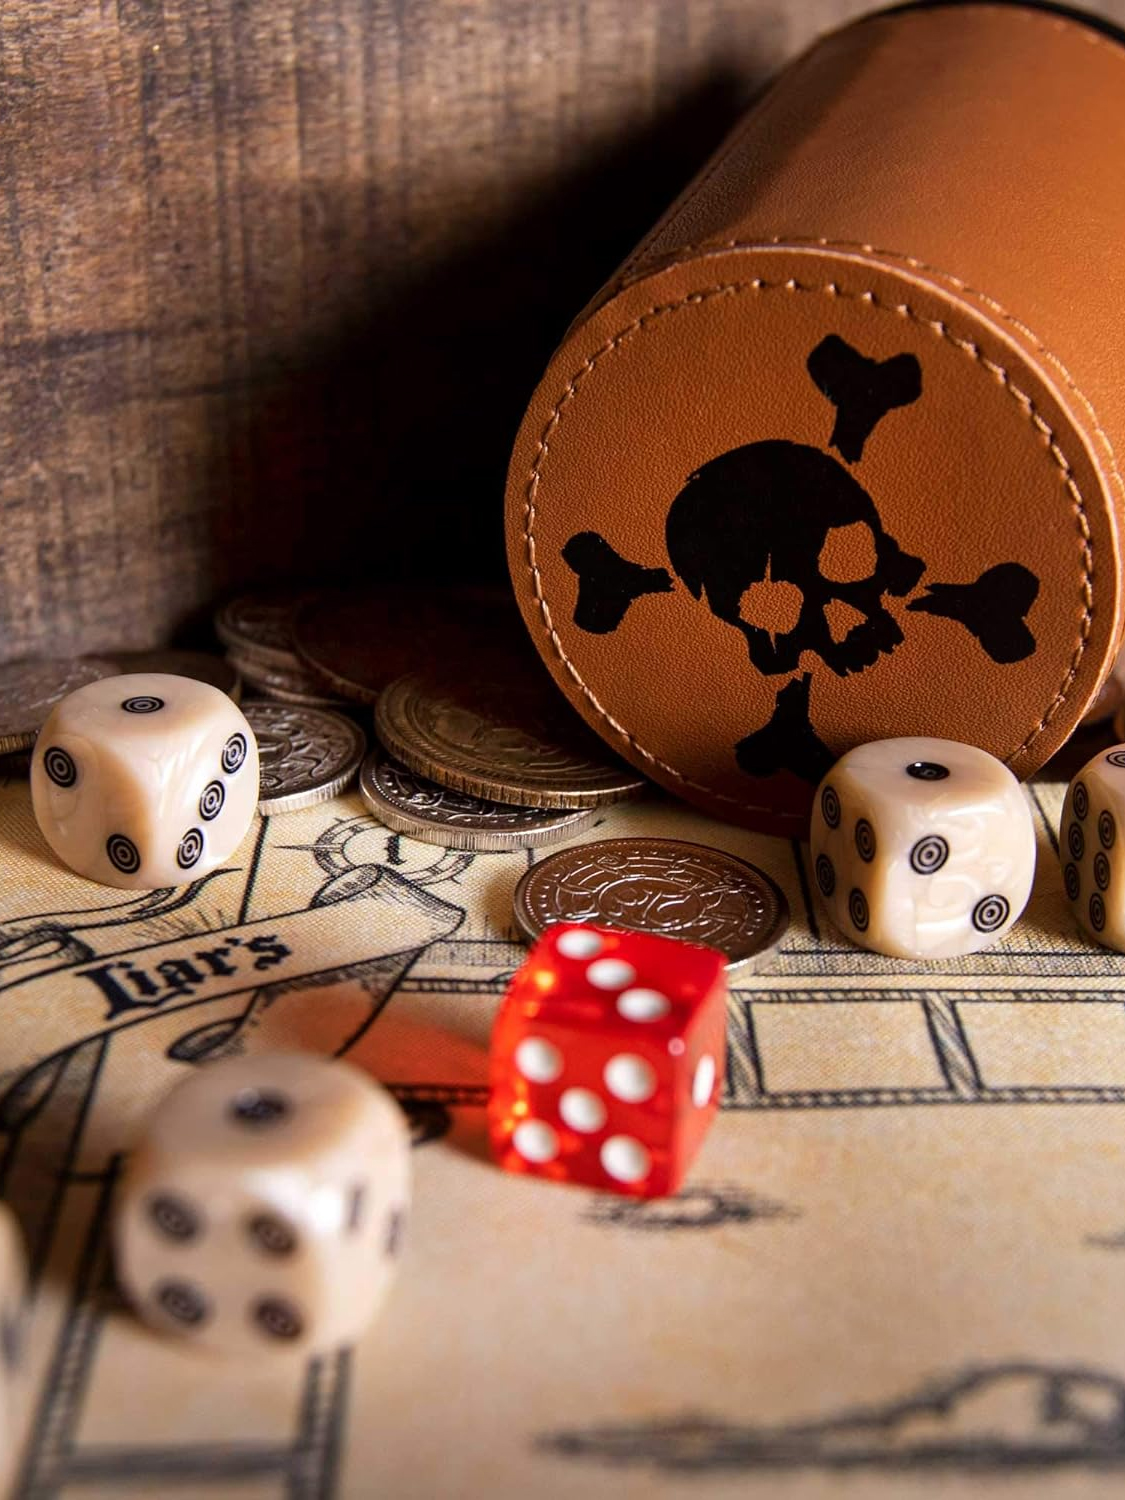 Dice, coins, and a leather cup with a skull-and-crossbones symbol on a table, suggesting elements of a pirate-themed game.